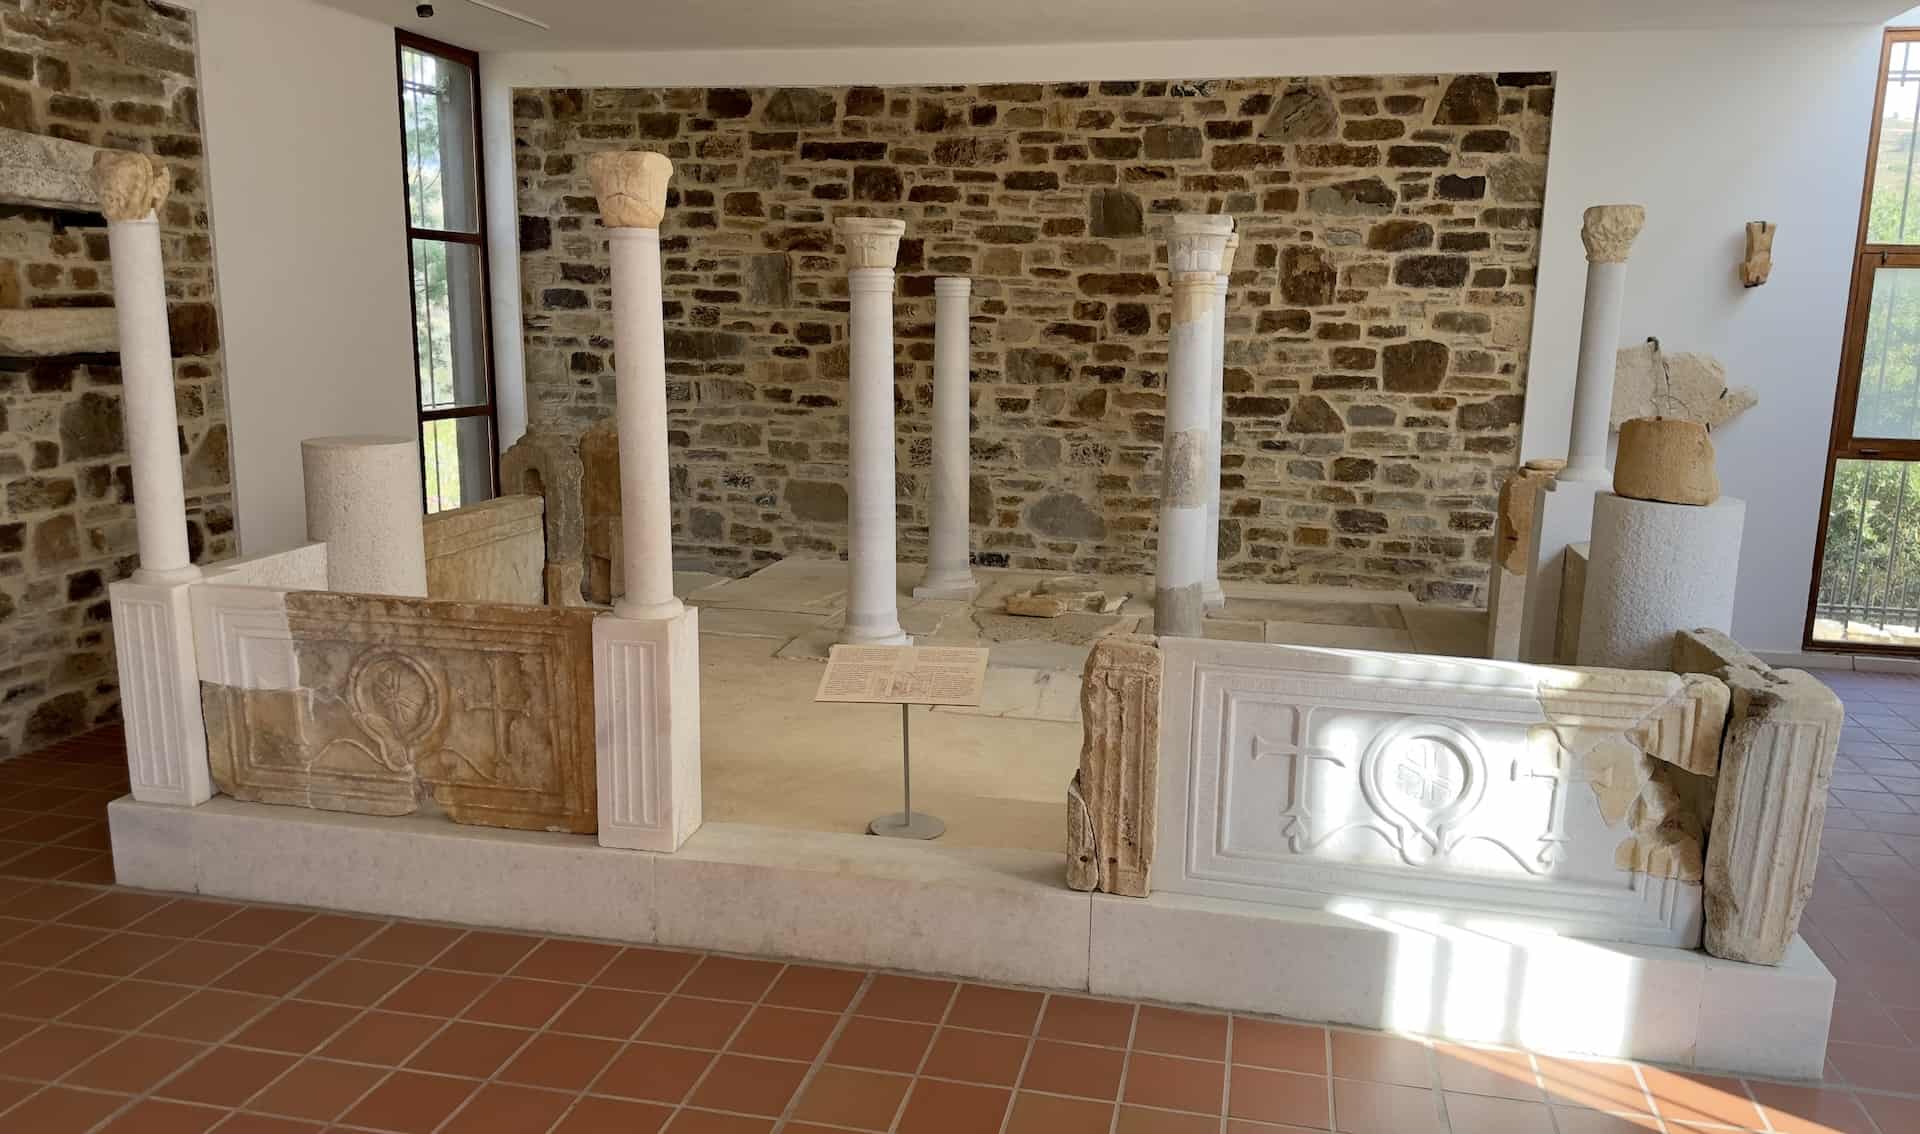 Church furnishings in the museum at the Temple of Demeter in Naxos, Greece